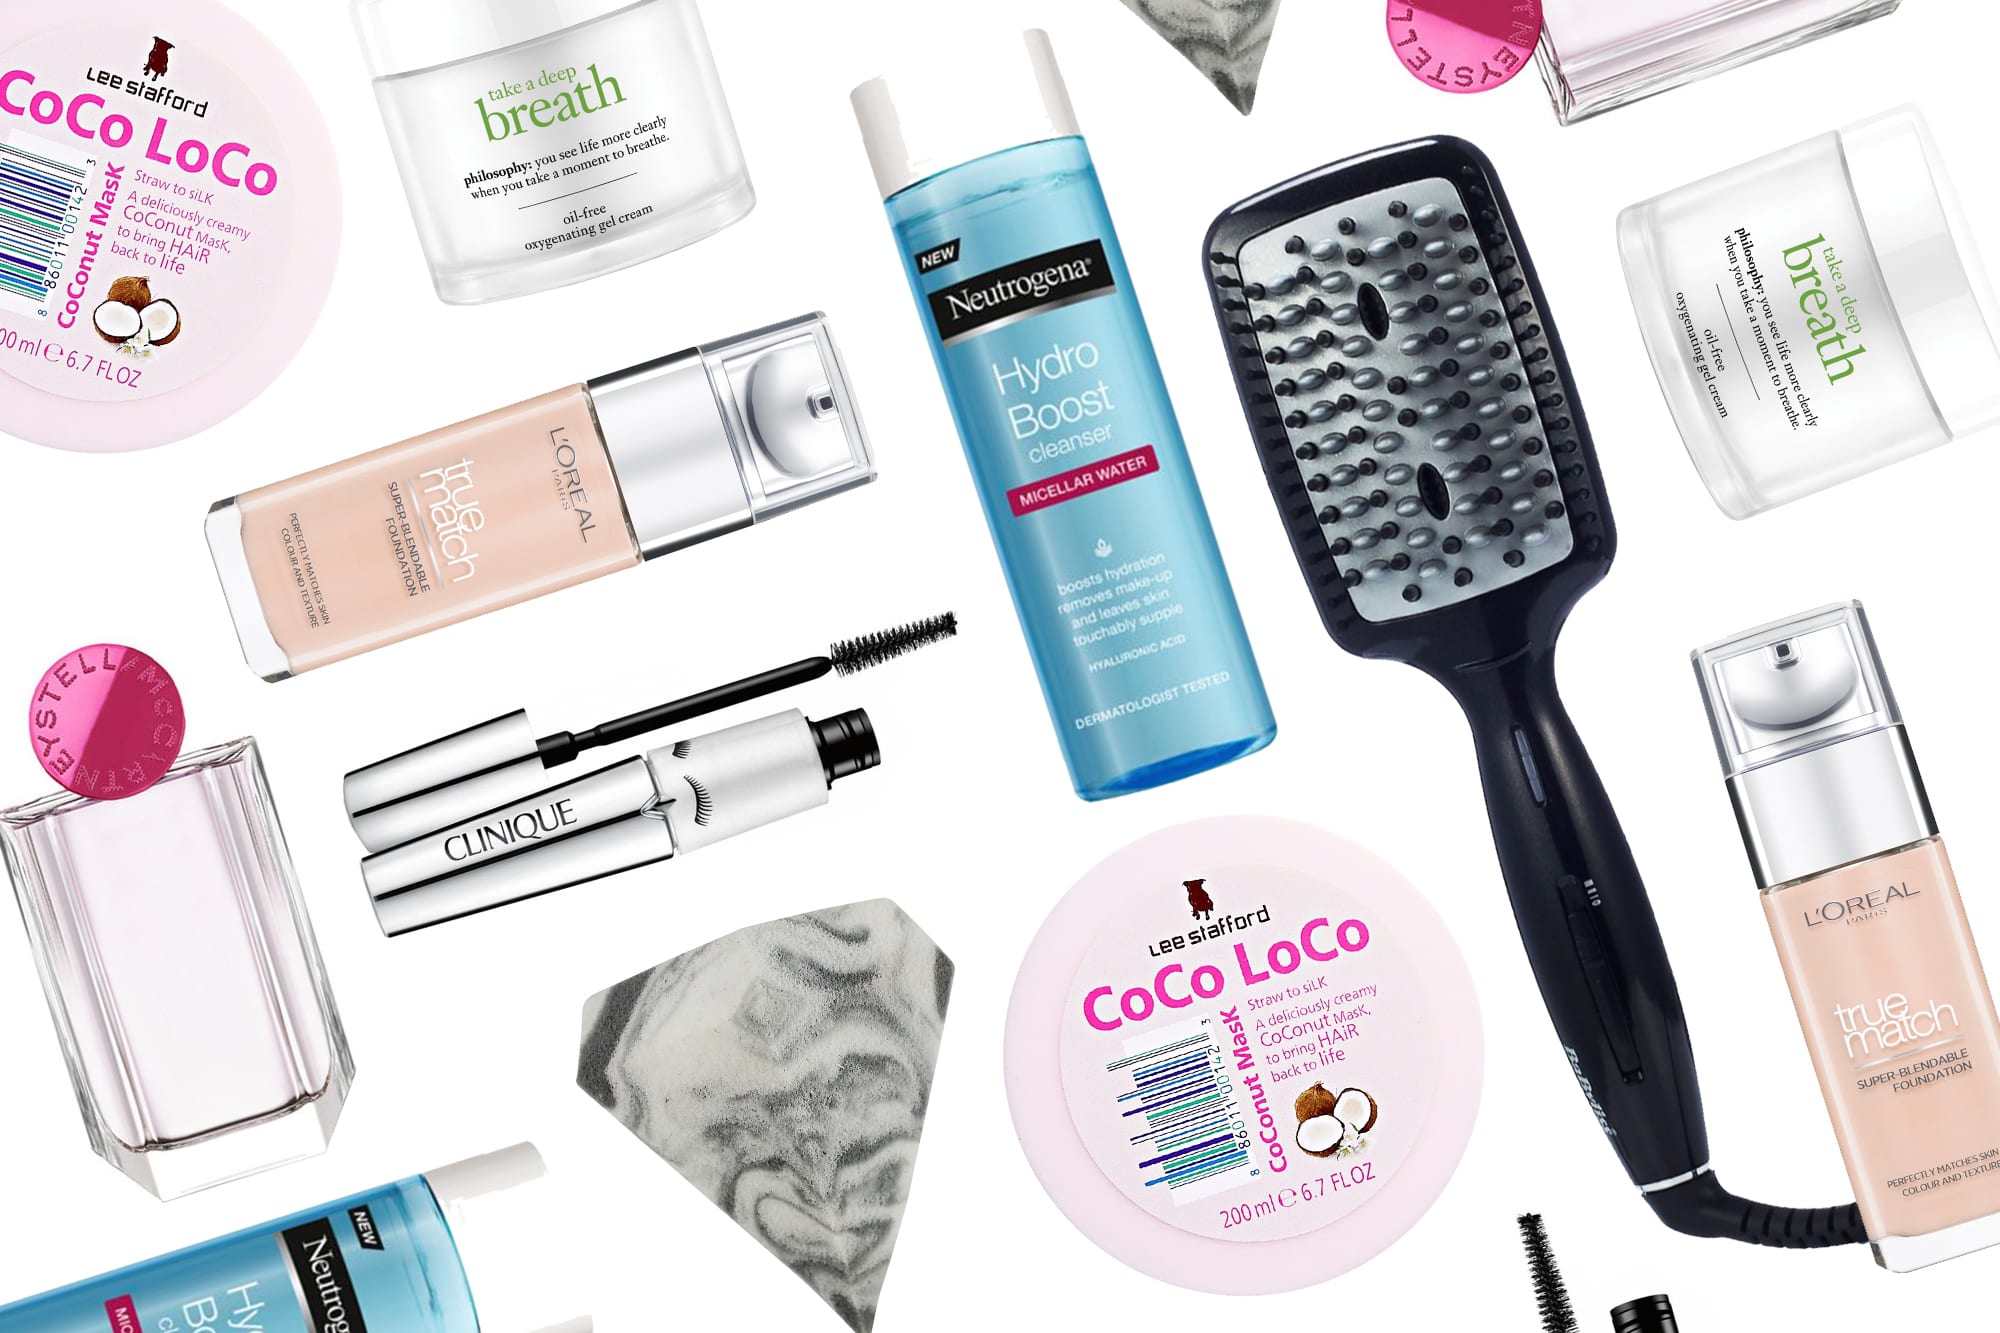 Eight Things We’re Buying From Boots This Month…